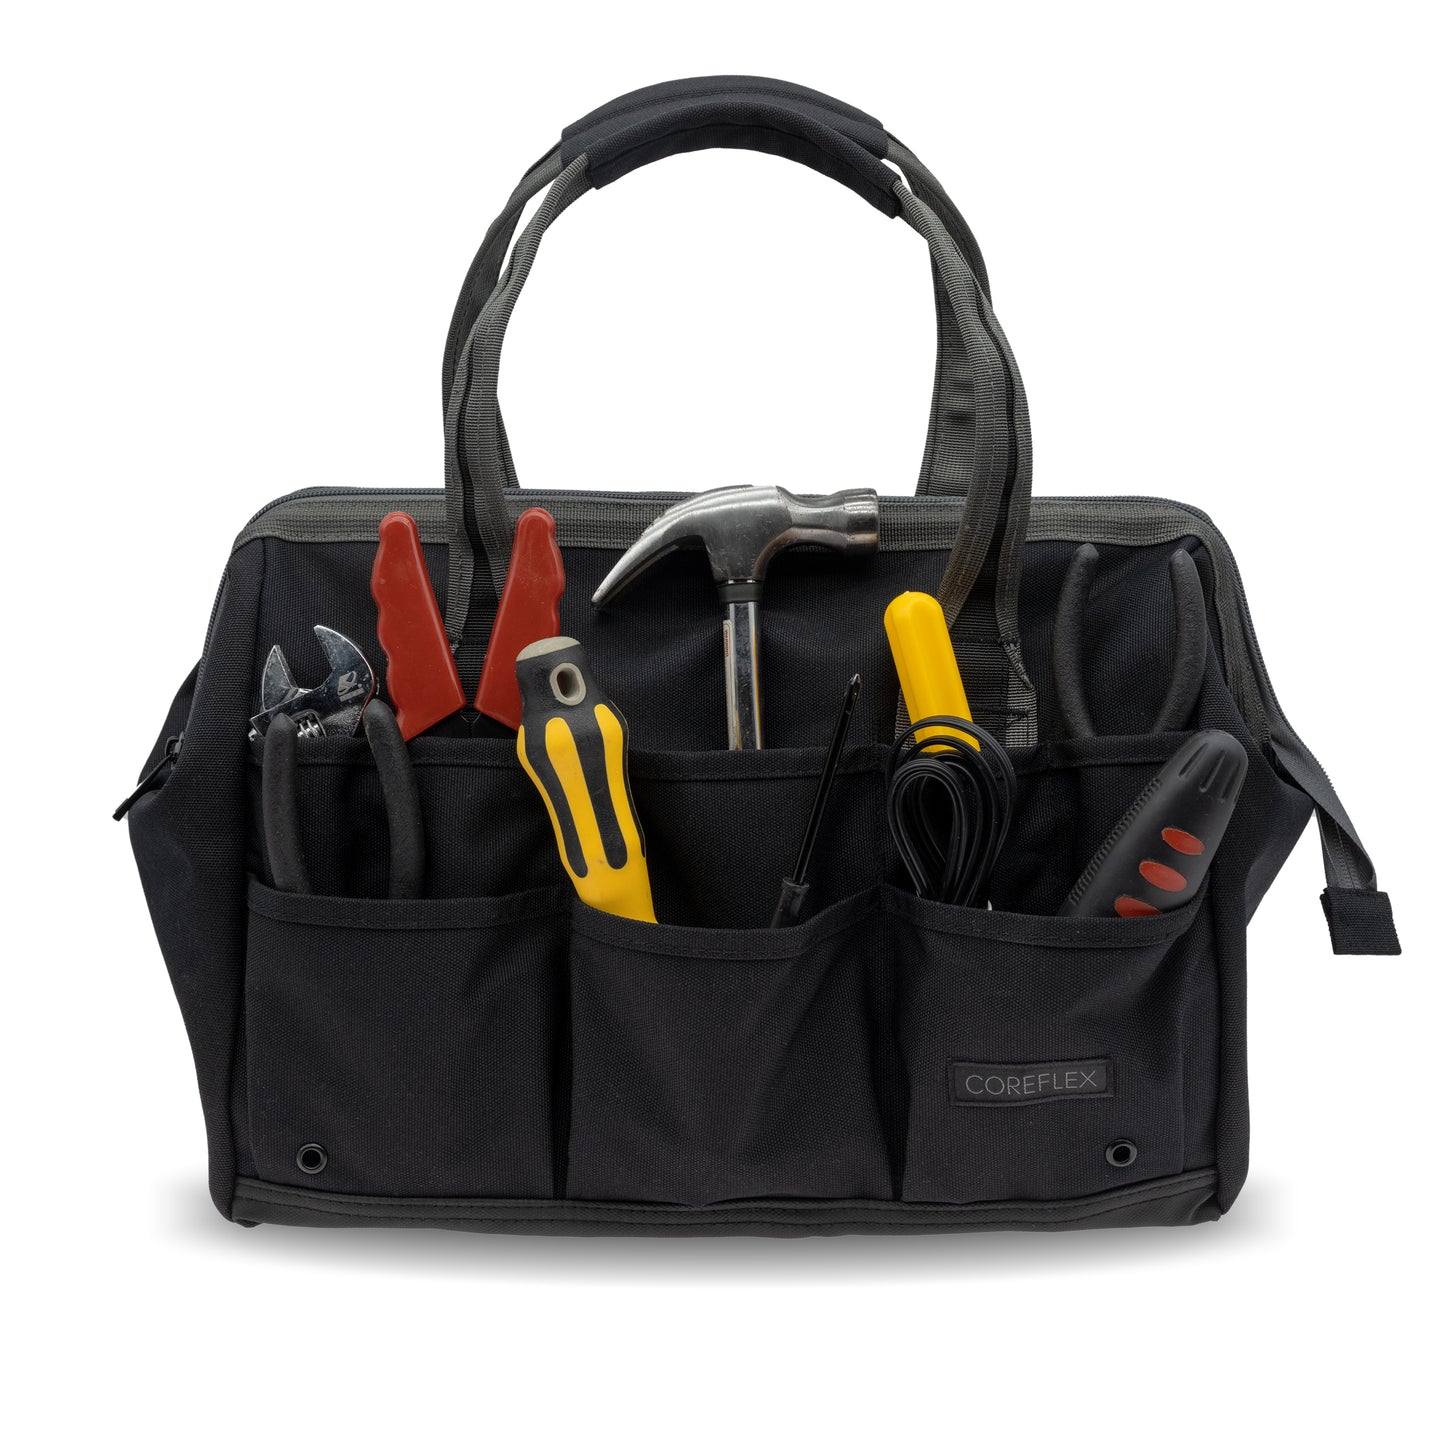 Coreflex 14inch Wide-Mouth Tool Bag